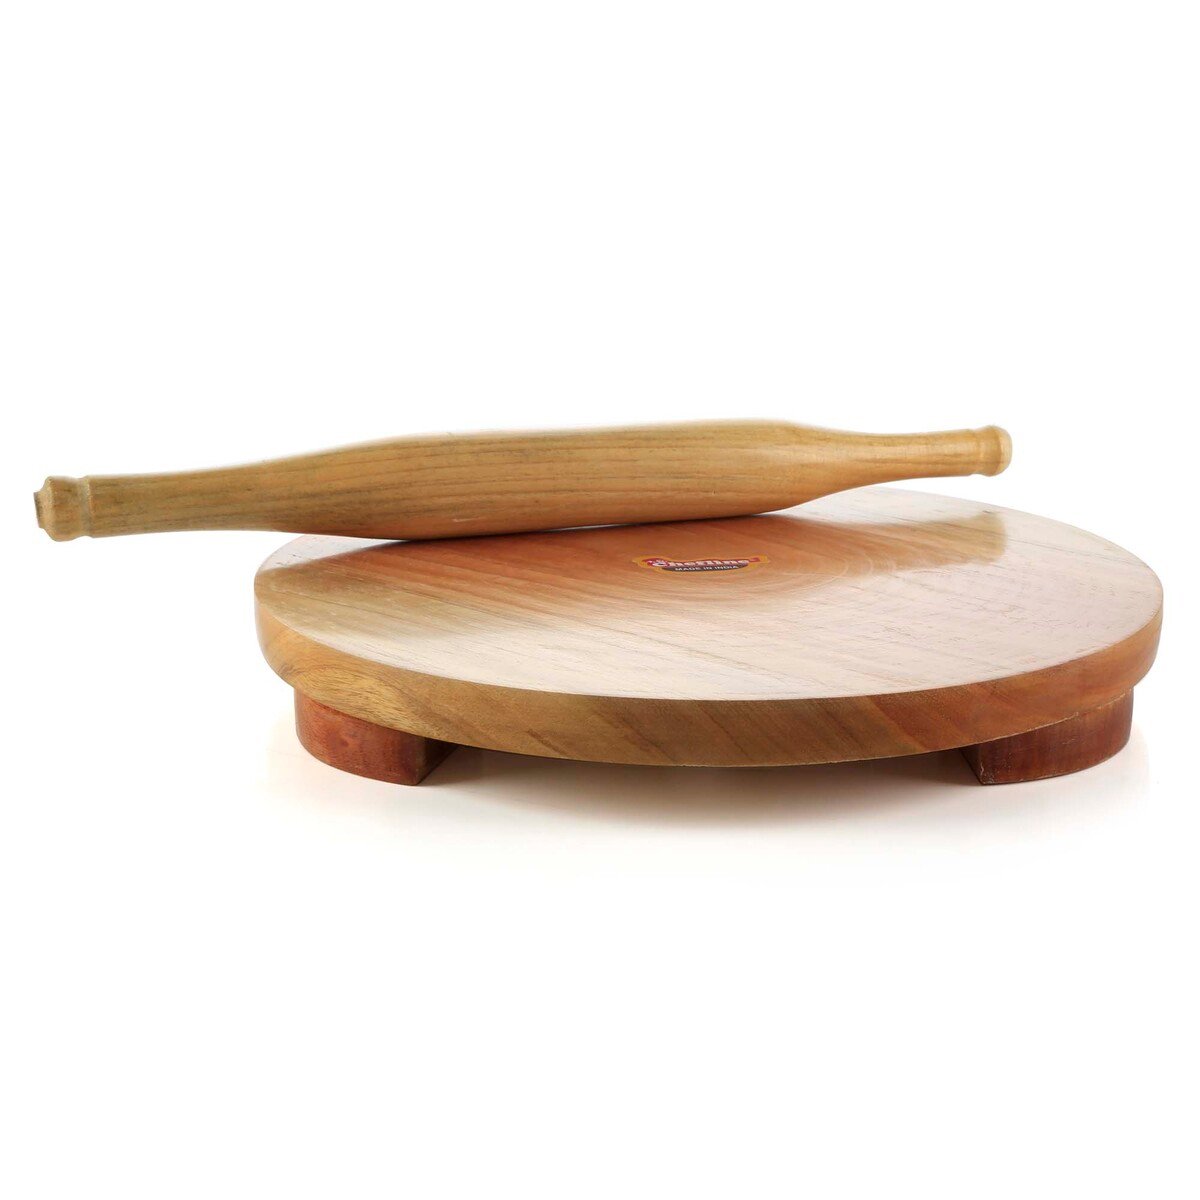 Chefline Wooden Polpat with Belan, 12 inches, Wooden